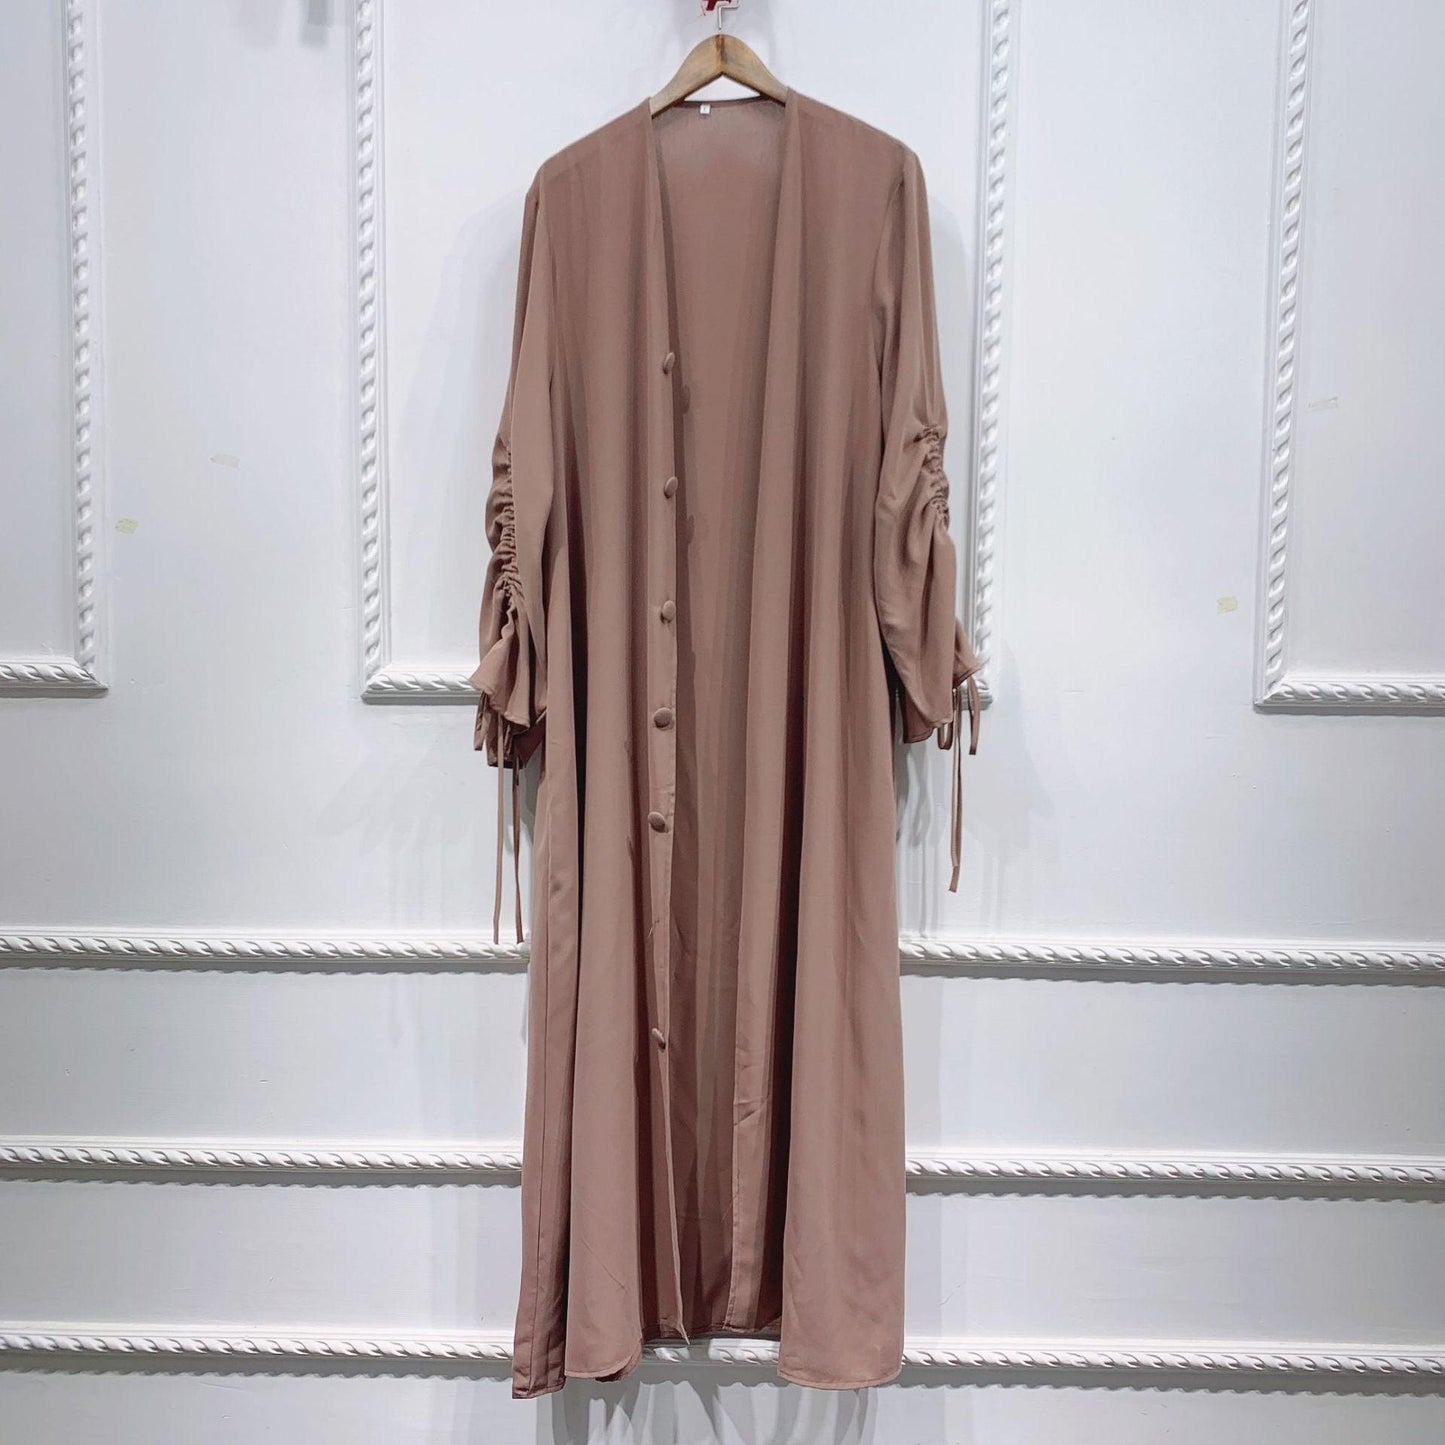 Middle Eastern Women's Robe - Try Modest Limited 